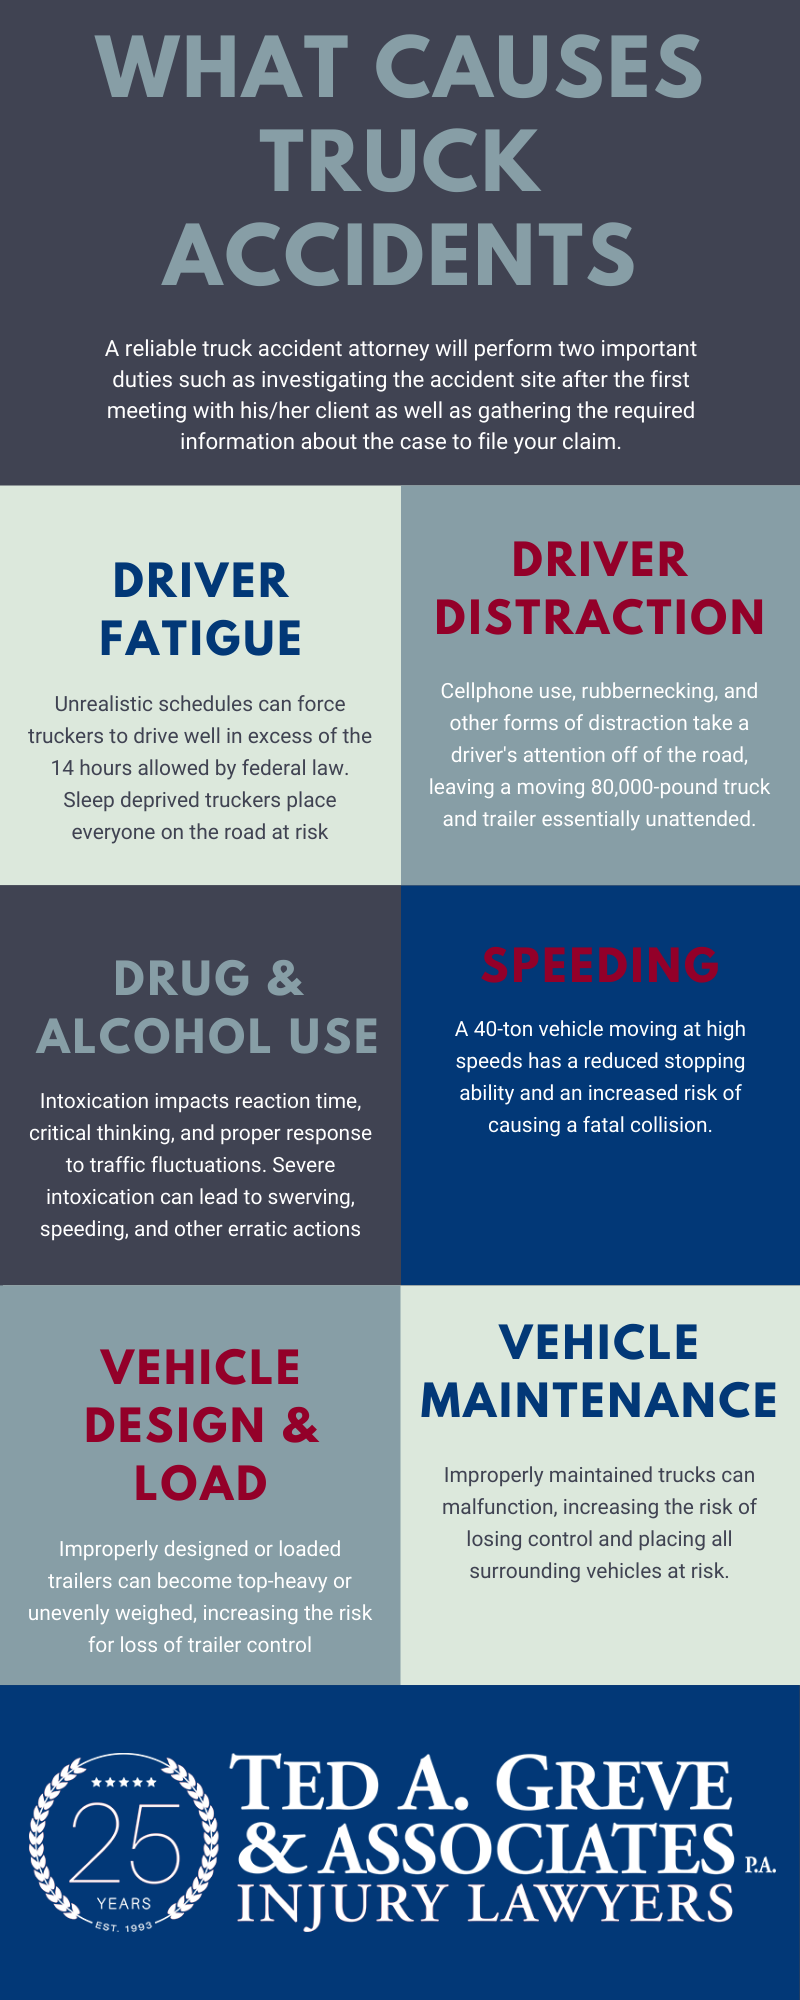 Ted Greve Charlotte Truck Accident Infographic